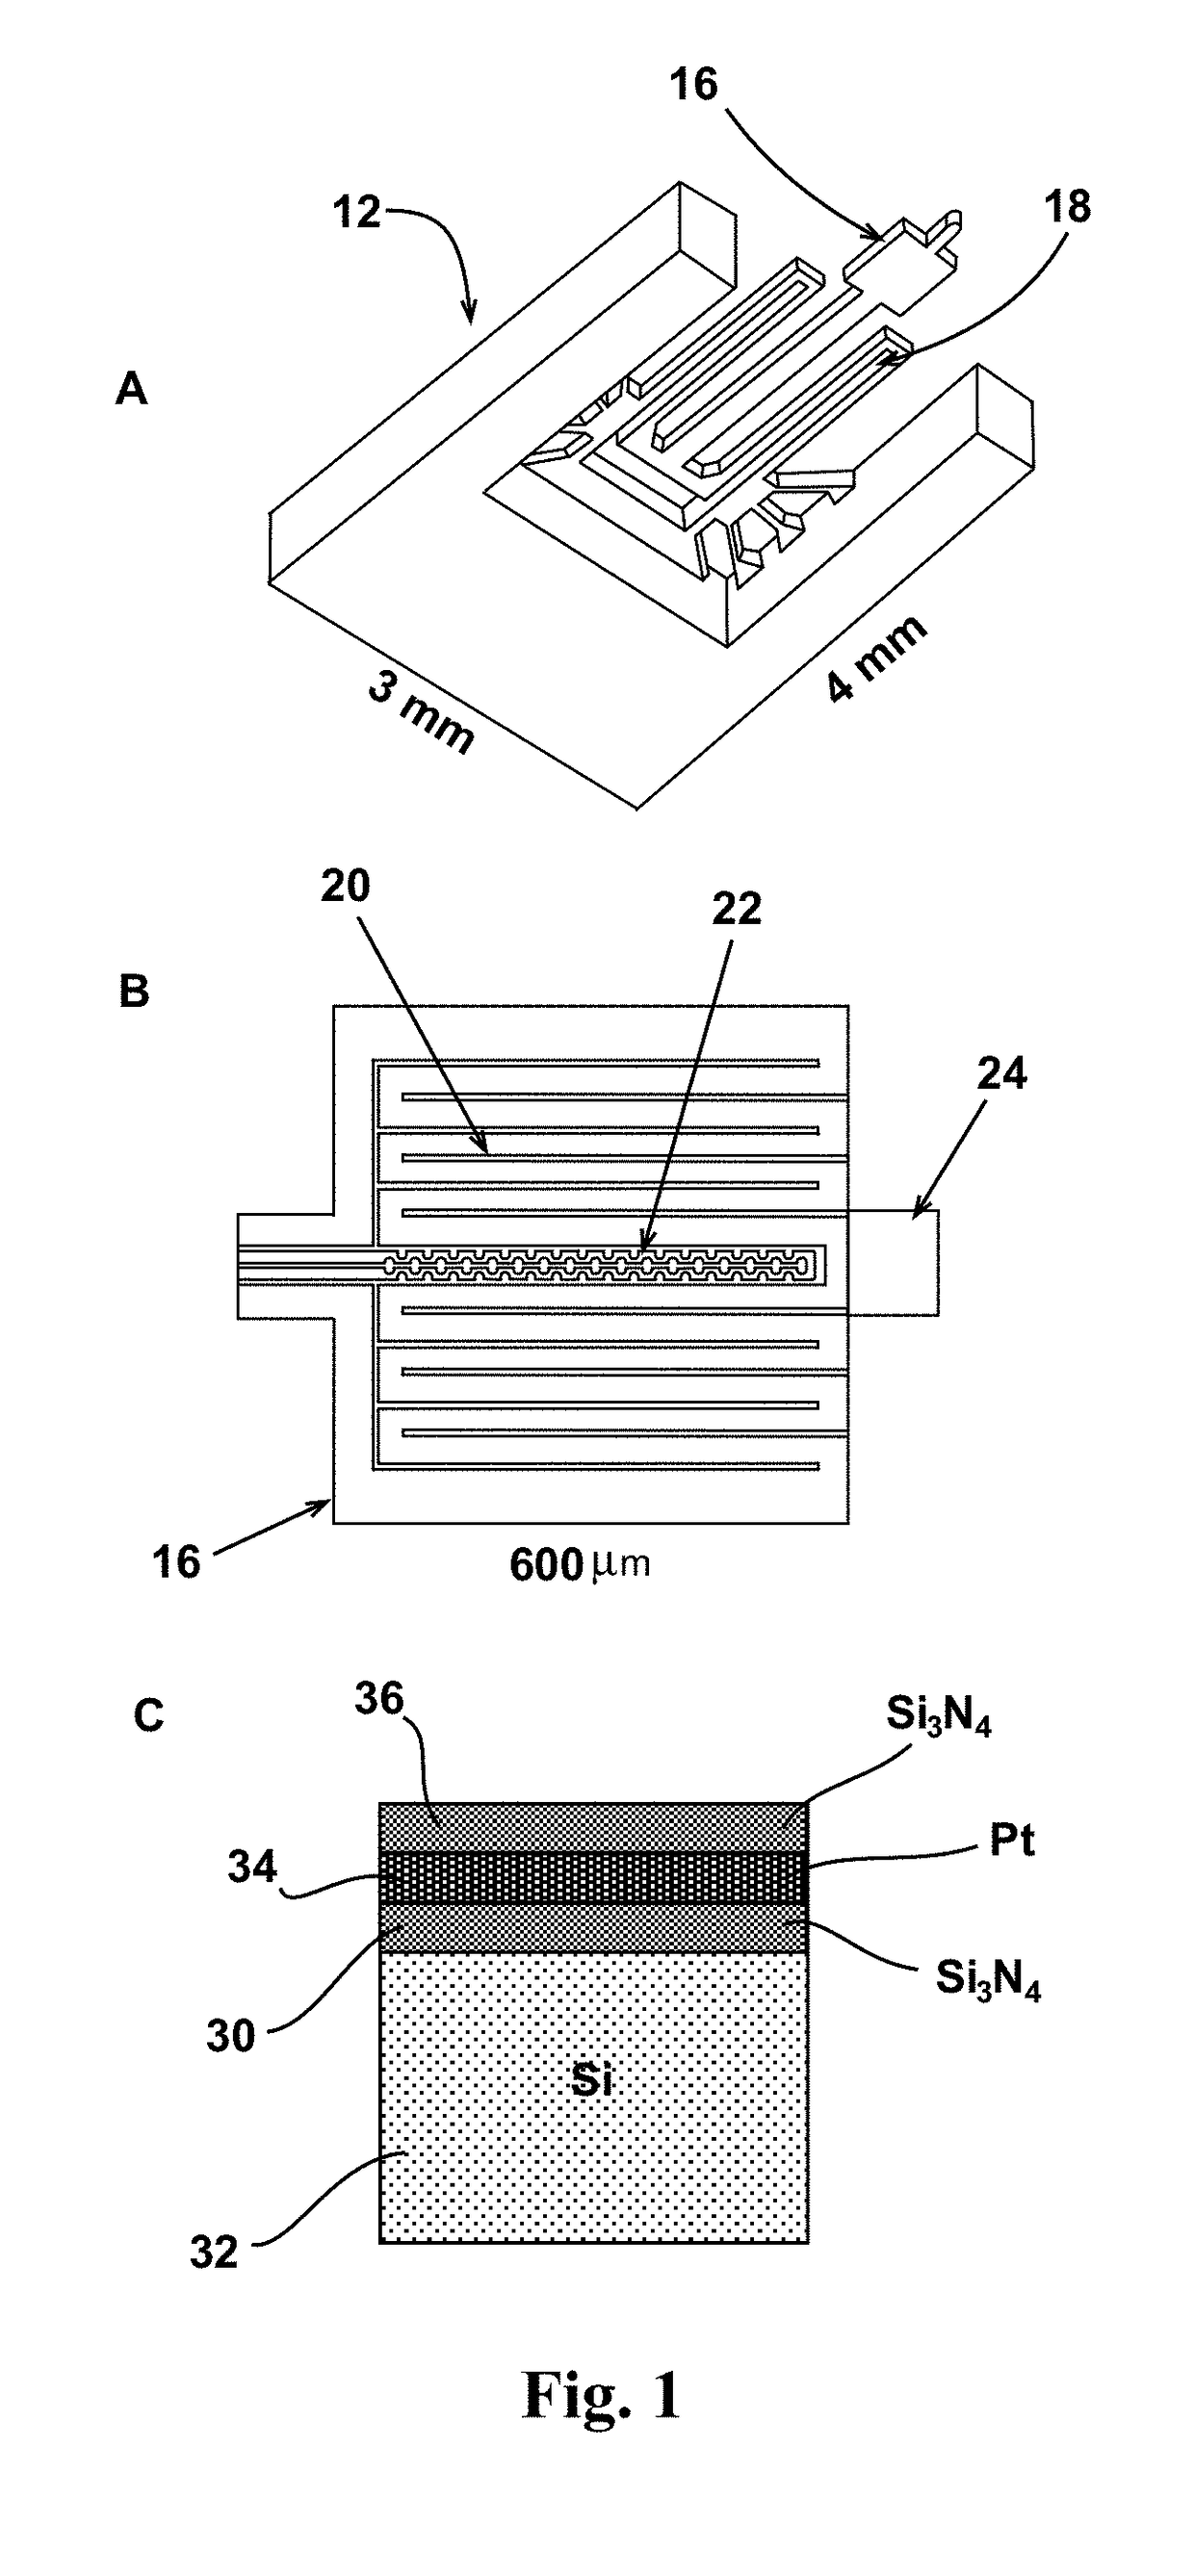 Thermal conductivity measurement apparatus and related methods